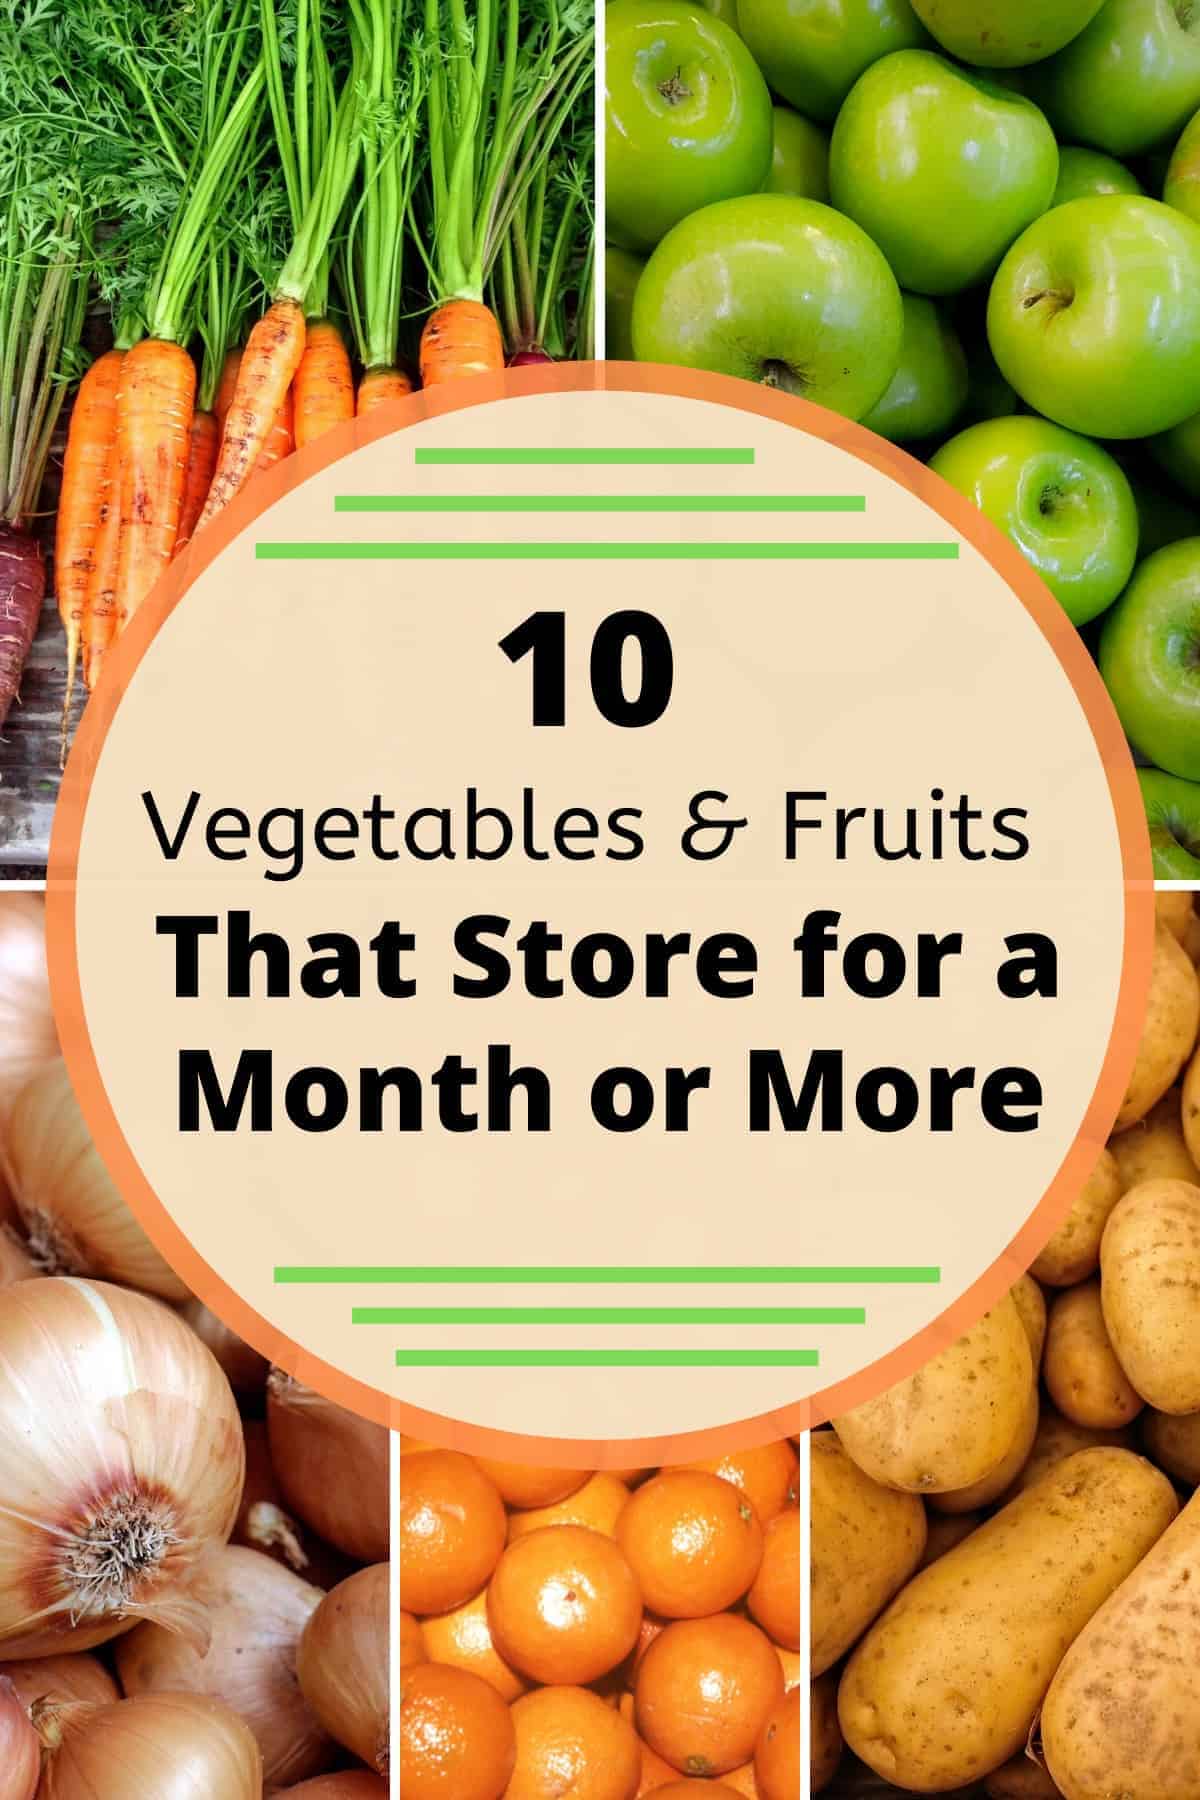 Text on Image: 10 Fruits & Vegetables that Keep for a Month or More. Image background: carrots, potatoes, onions, oranges, apples.